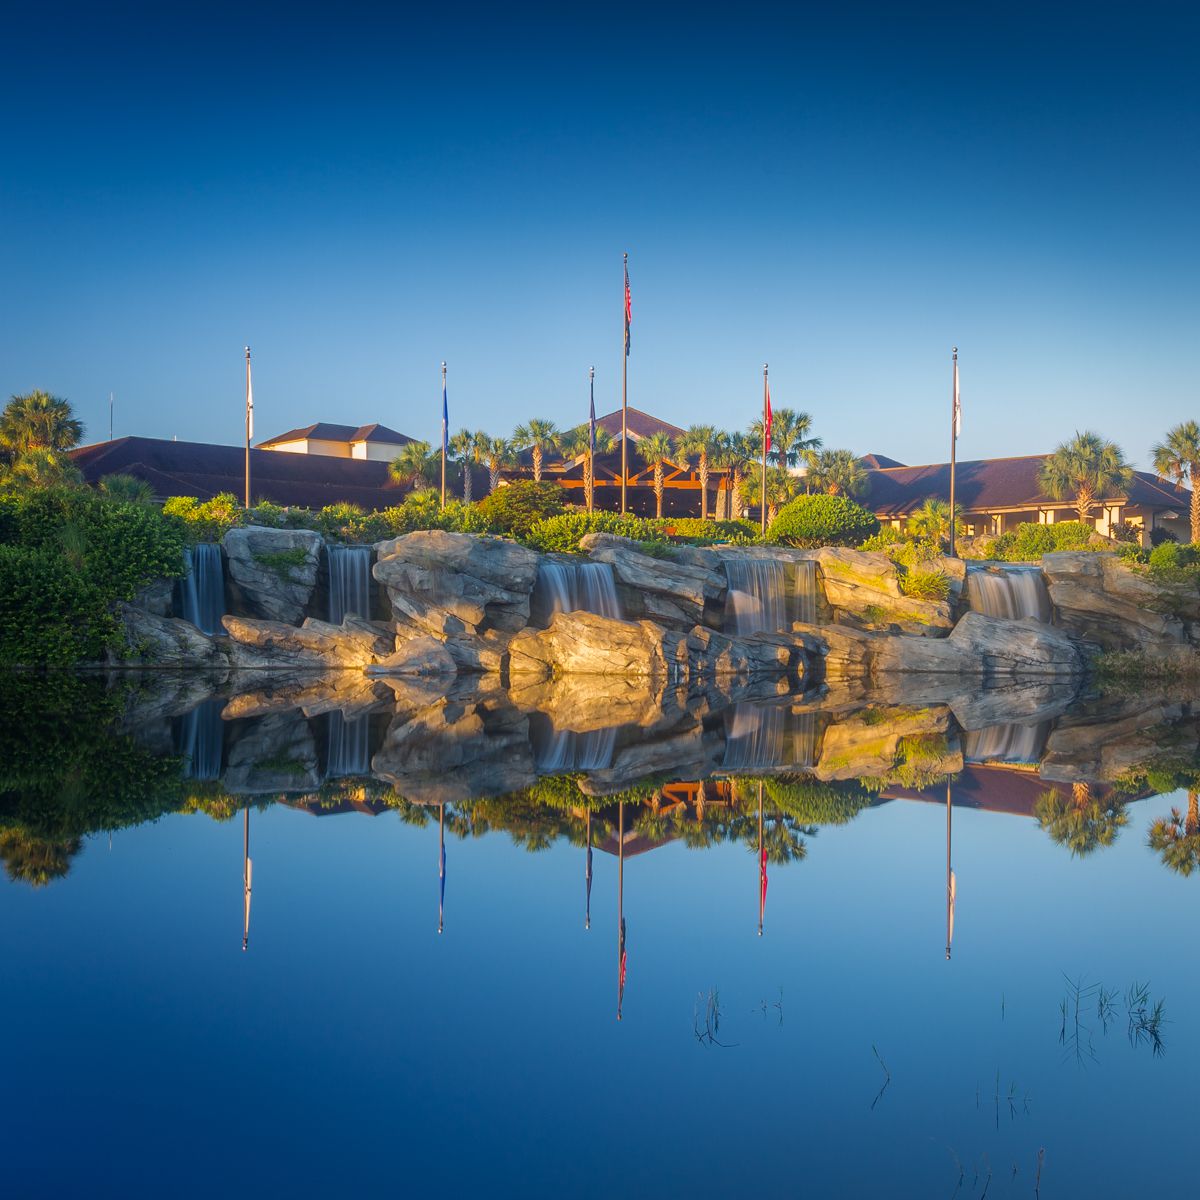 <p>Disney World has expanded its reach so much that it really does seem to be living up to its name. With so many resorts under its moniker, not everyone knows about <a href="https://www.shadesofgreen.org/">Shades of Green</a> — Disney's resort that's dedicated <a href="https://veteran.com/shades-of-green/">exclusively to military members</a> and their families. Eligibility for the resort includes different tiers, but at its root, it exists as a place for veterans to enjoy a Disney vacation at a lower price point. </p><p>If you're planning to take advantage of the resort's discount rates, you'll want to plan ahead, paying close attention to what offers are available. The resort's "Salute to Our Veterans" promotion, for instance, allows any honorably discharged veterans to vacation at Shades of Green during January and September.</p>